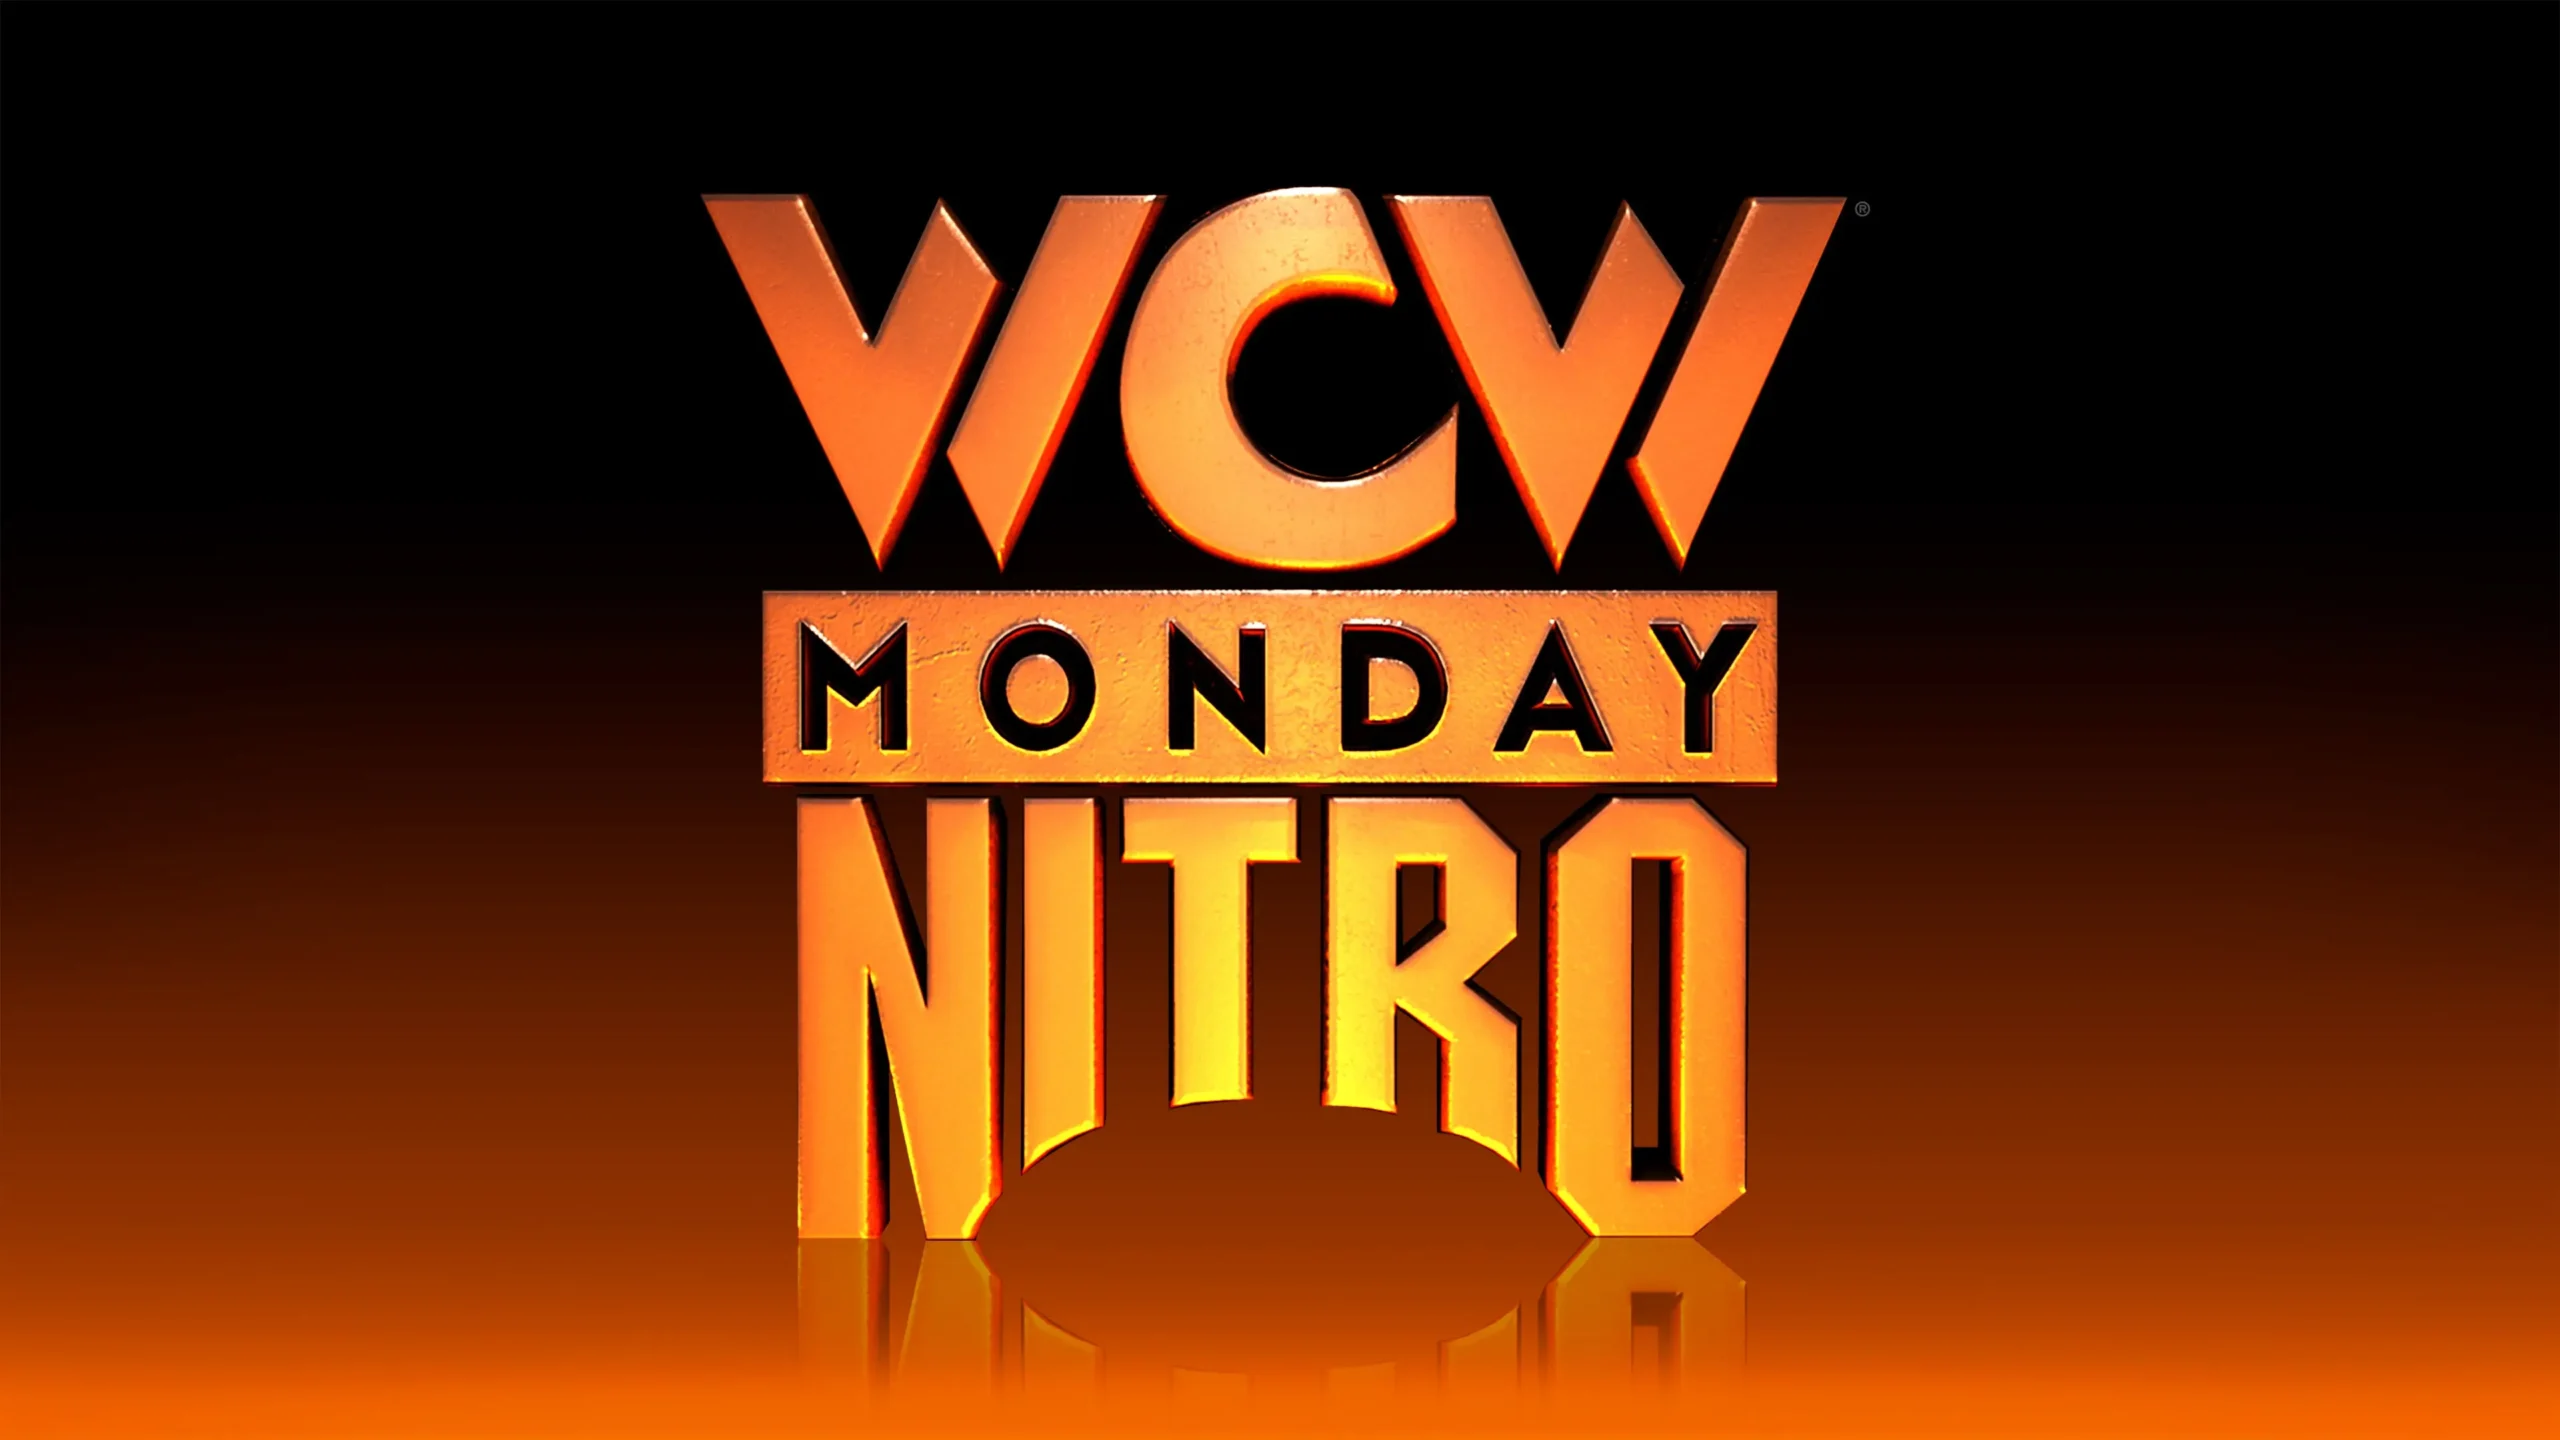 “The Rock’s Documentary Series ‘Who Killed WCW?’ is Set for Debut on Vice TV Tonight”